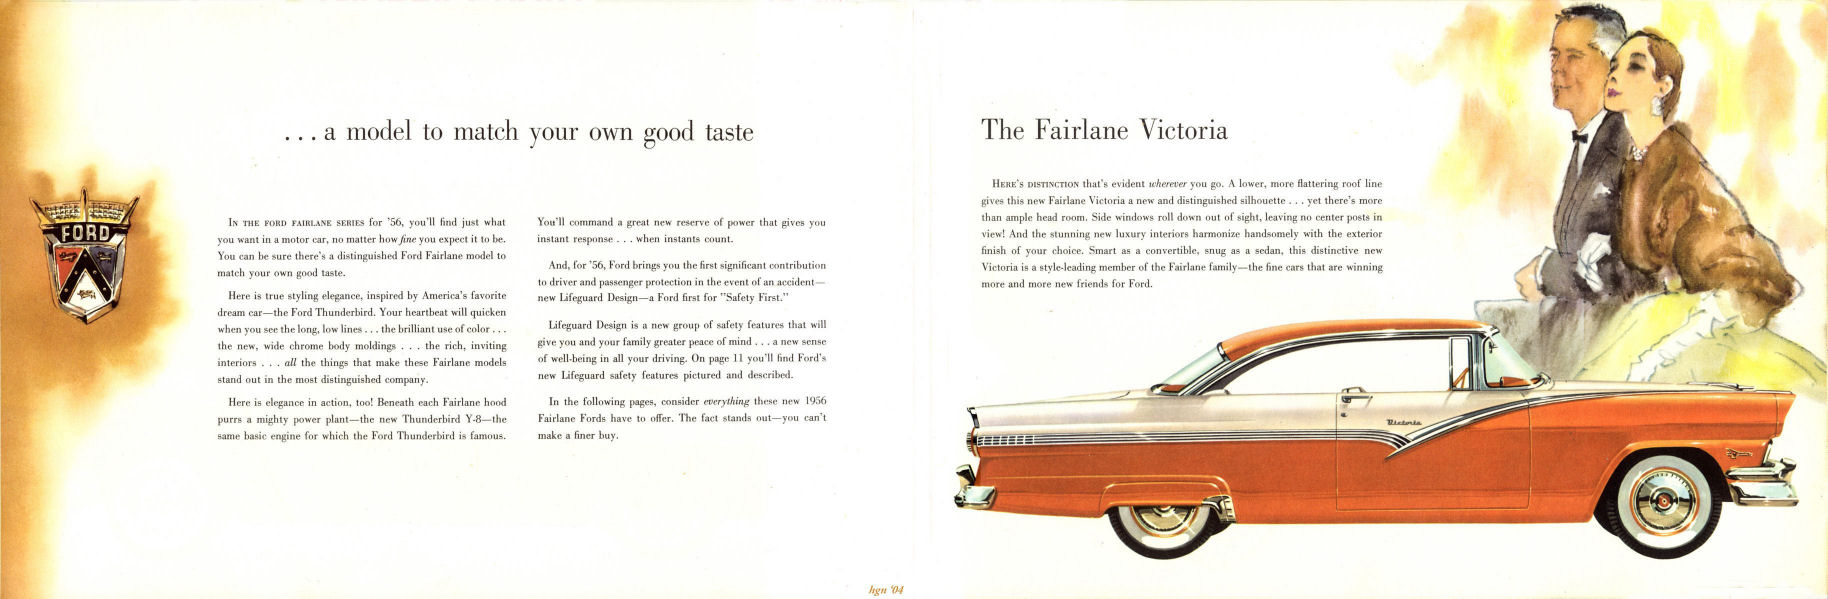 1956 Ford Fairlane Brochure Page 10